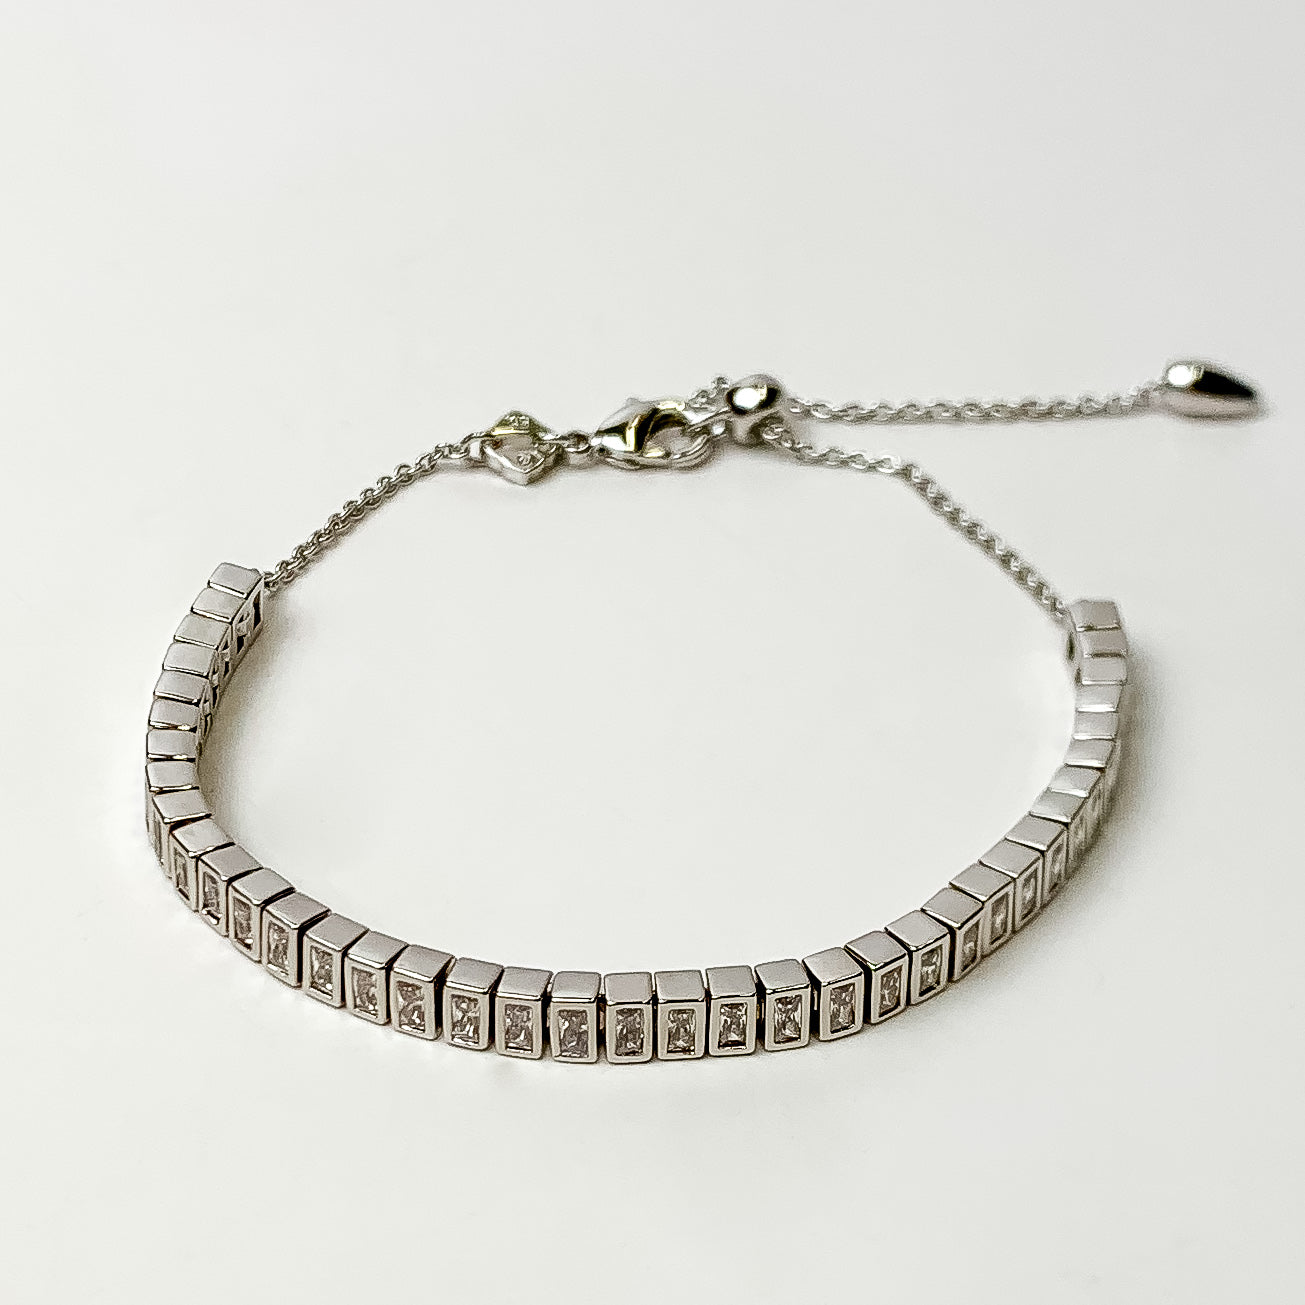 This Gracie Silver Long Tennis Delicate Chain Bracelet in White by Kendra Scott is pictured on a white background.